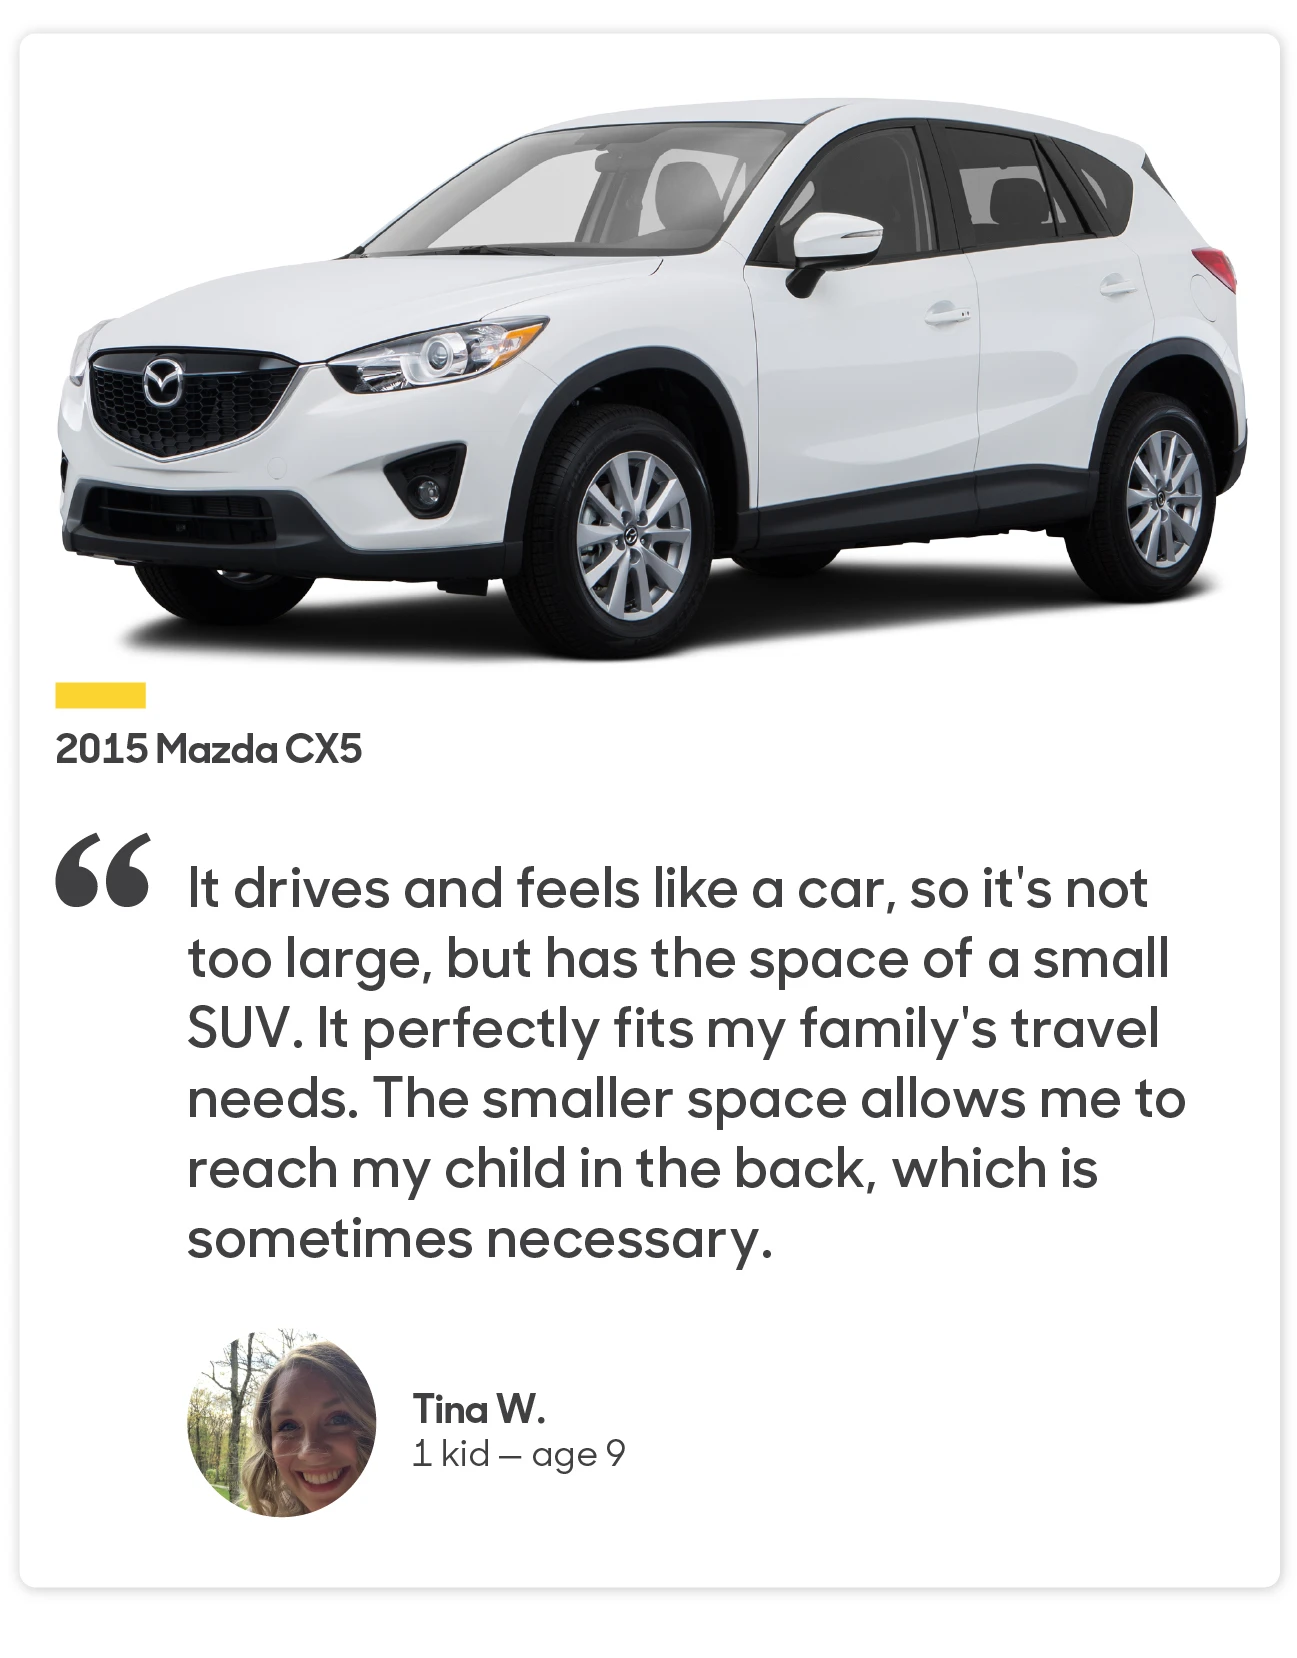 Tina 1 child — age 9 2015 Mazda CX5
“It drives and feels like a car, so it's not too large, but has the space of a small SUV. It perfectly fits my family's travel needs. The smaller space allows me to reach my child in the back, which is sometimes necessary.”
